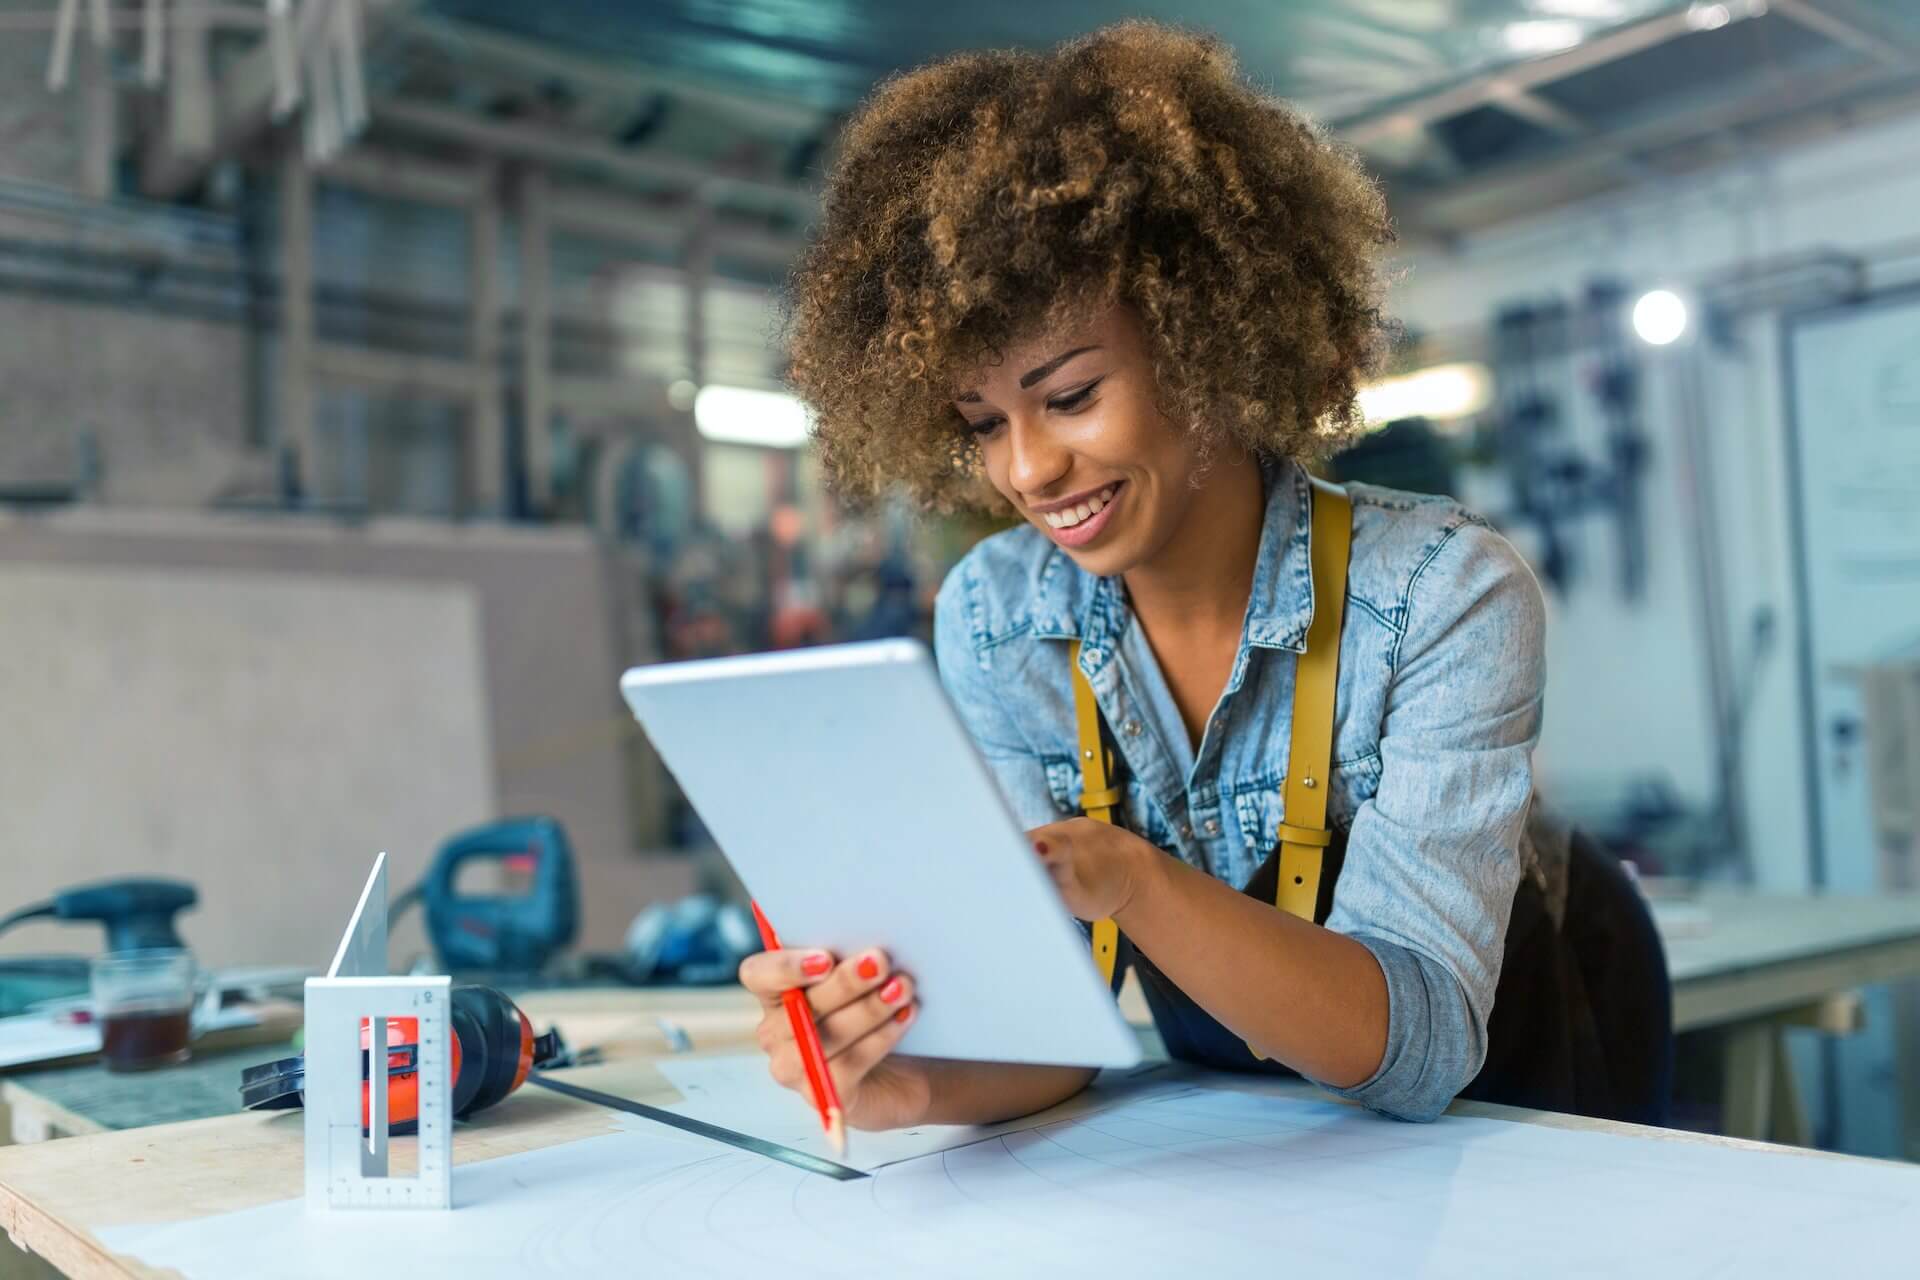 Smiling Black woman wearing apron and leaning on table to looking at iPad in studio